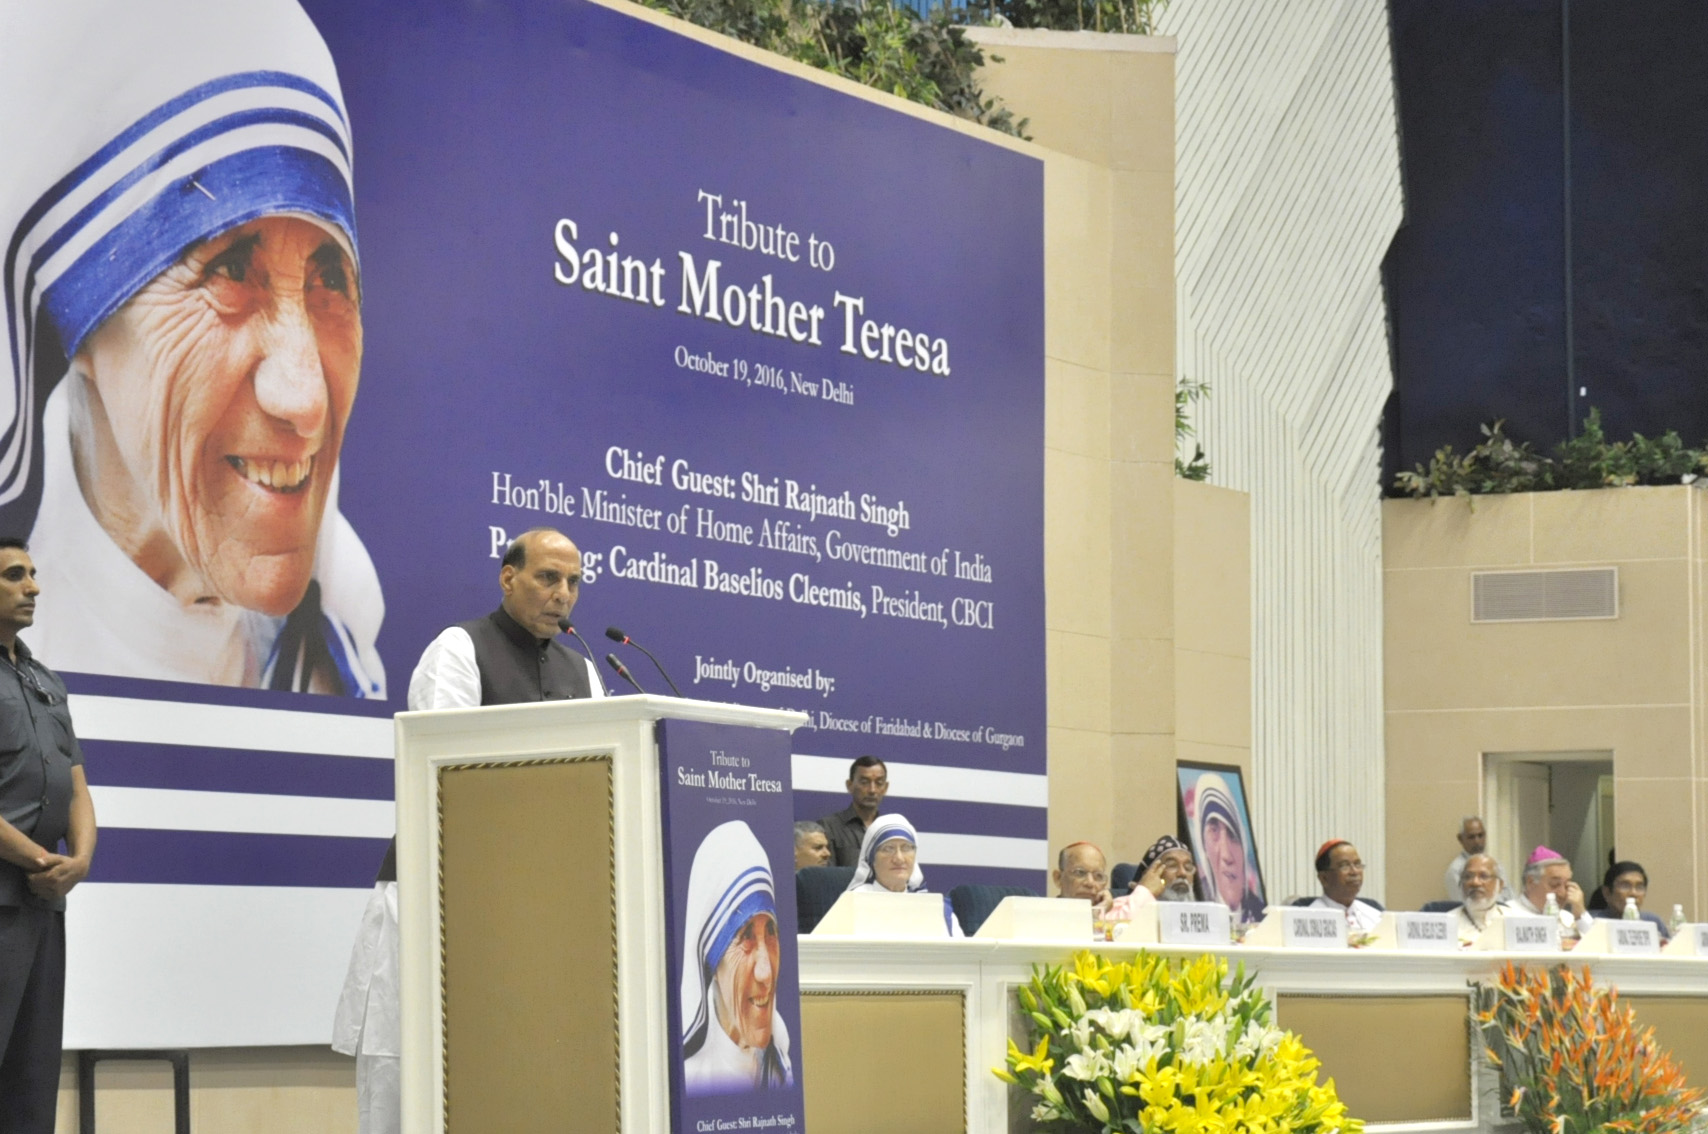 The Union Home Minister, Shri Rajnath Singh addressing at the celebration to commemorate the Canonization of Saint Mother Teresa, in New Delhi on October 19, 2016.